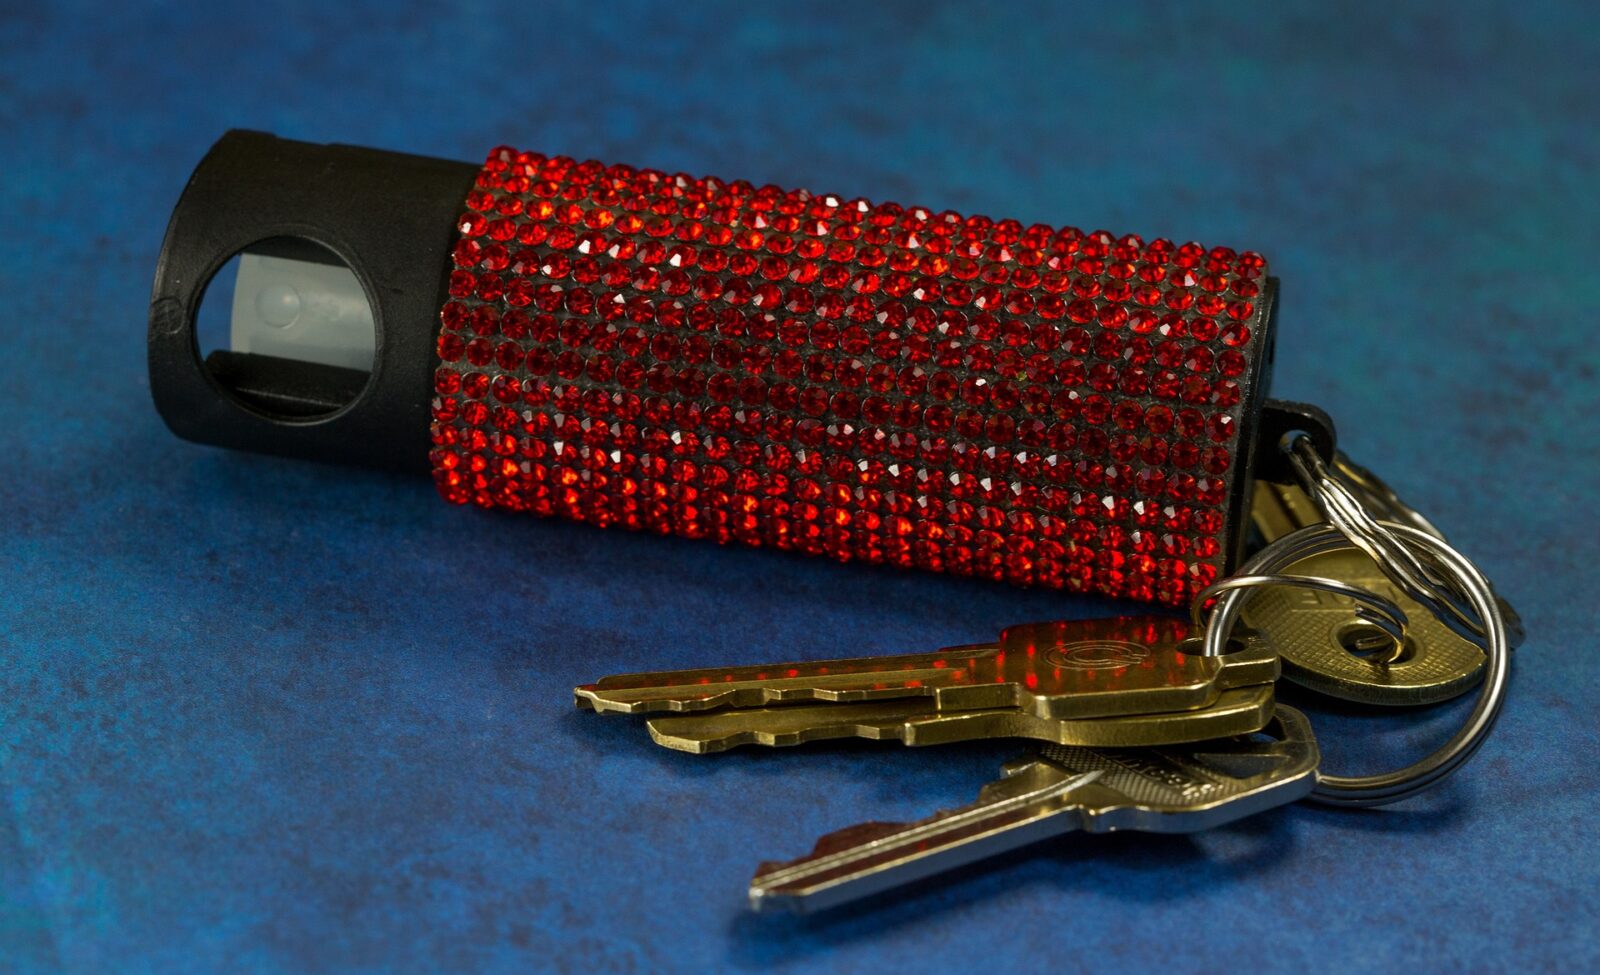 A pepper spray that has been bedazzled with red jewels and hooked as a keychain.